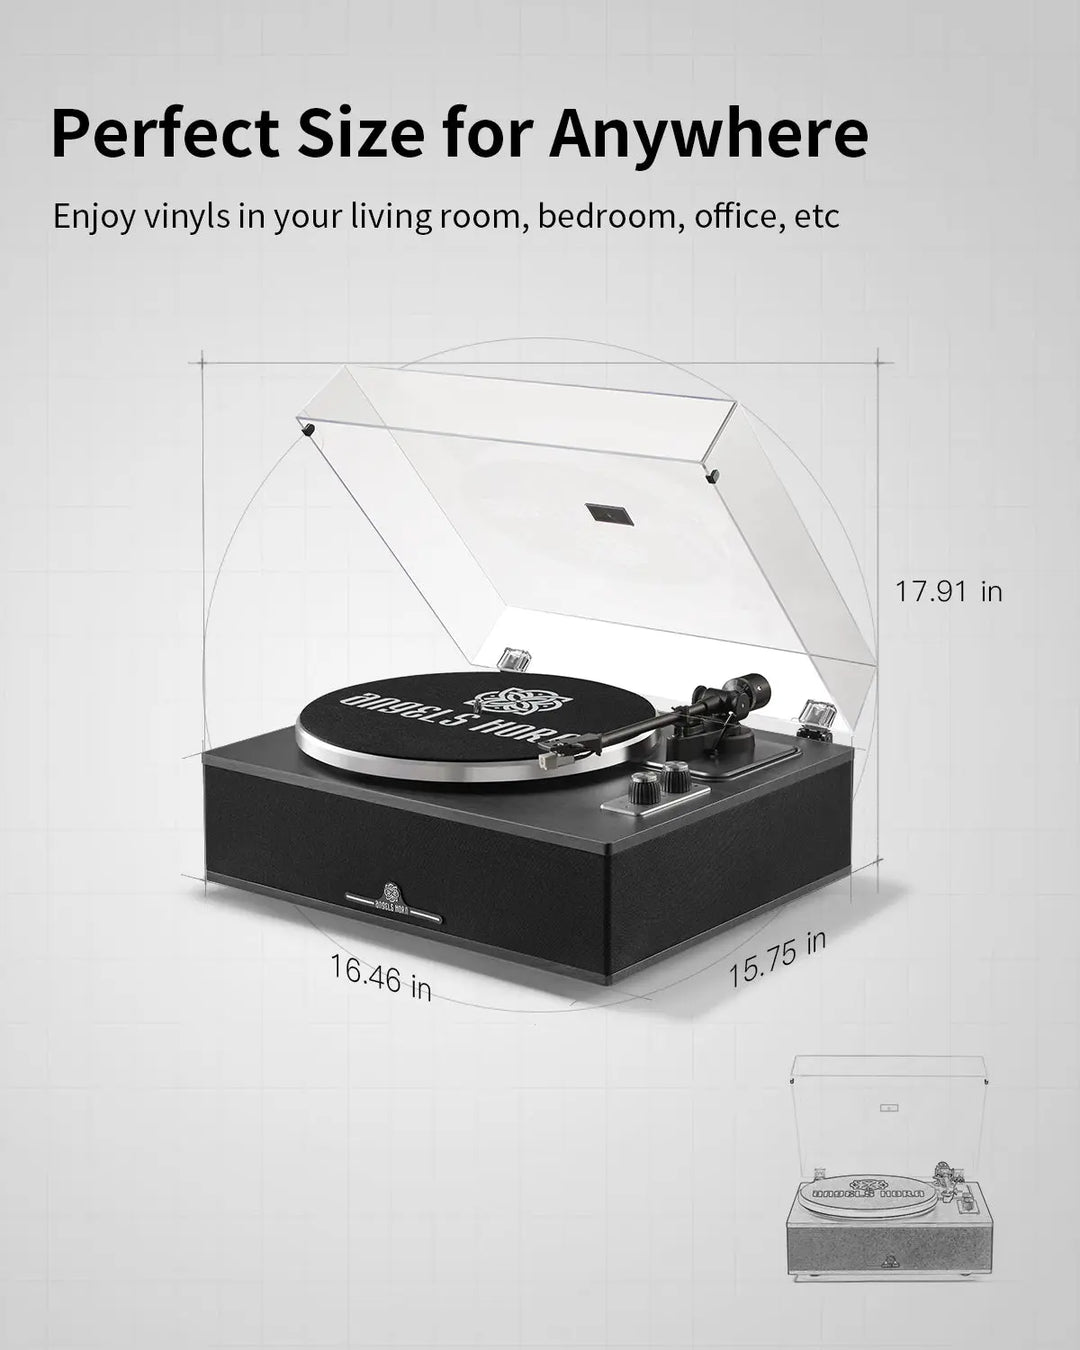 Shop Turntables, Record Players, Speakers and more